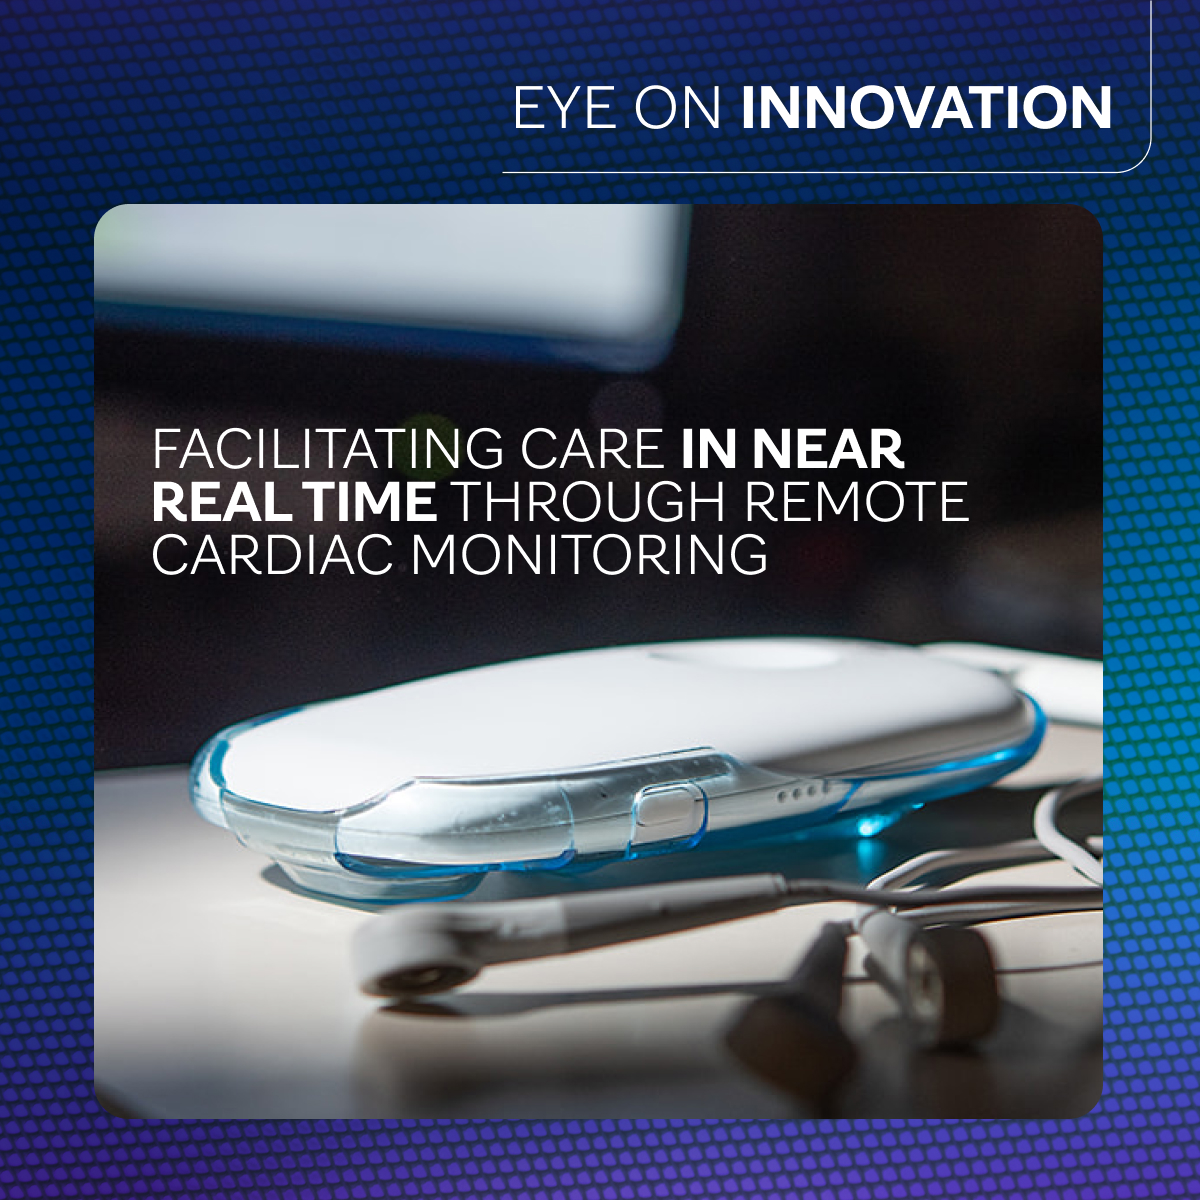 “People put a lot of trust in us with cardiac monitoring,' says @noseworthypeter, medical director of Mayo Clinic’s Electrophysiology and Heart Rhythm Monitoring Lab. 'They want us to be on the other end of the line responding and taking care of them.” bit.ly/49gMApY